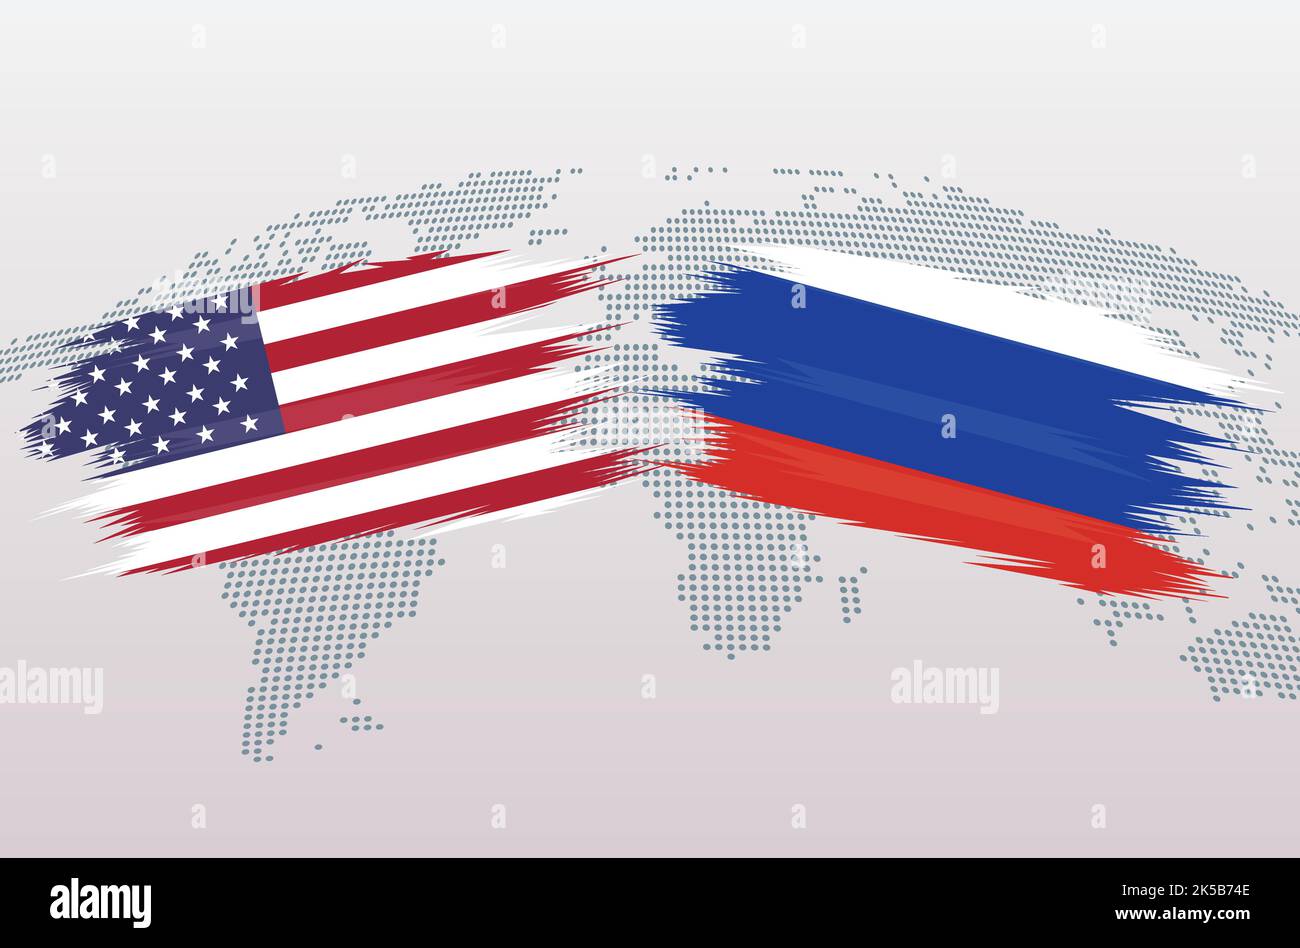 USA VS Russia flags. The United States of America VS Russian flags, isolated on grey world map background. Vector illustration. Stock Vector